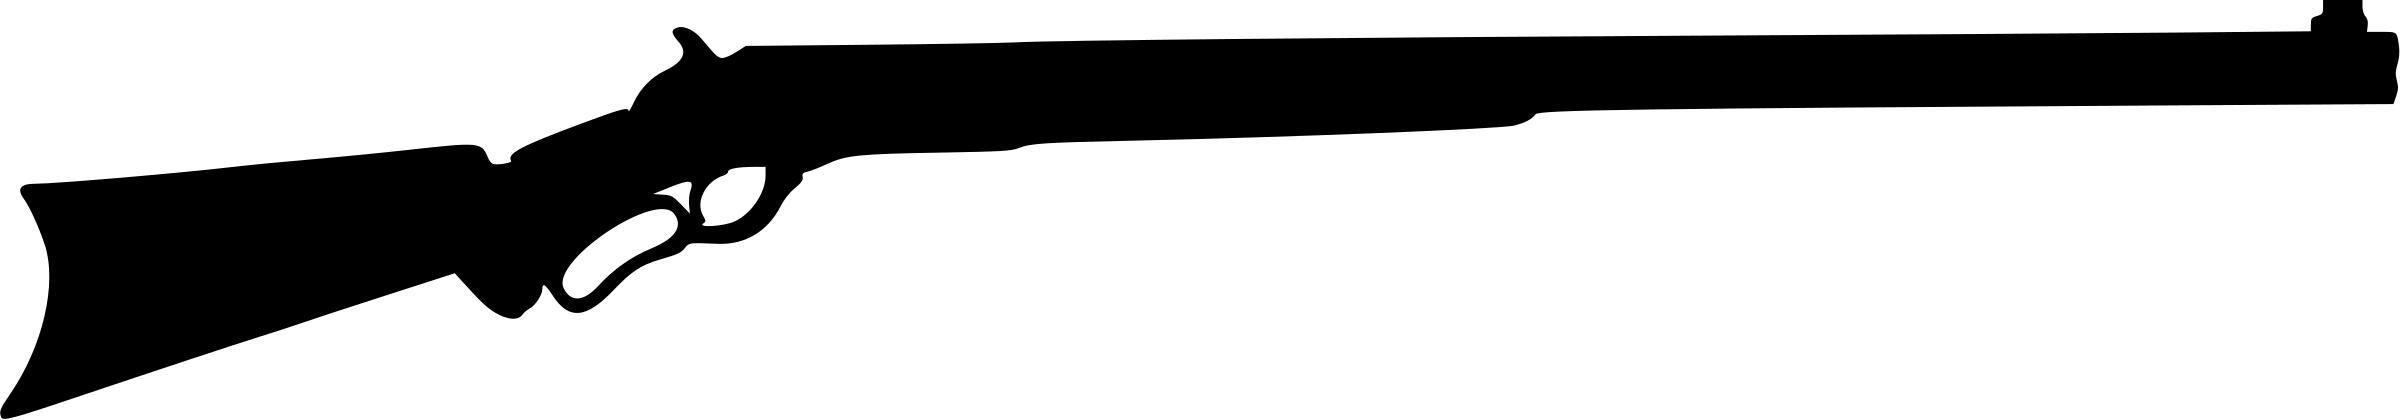 Rifle silhouette png